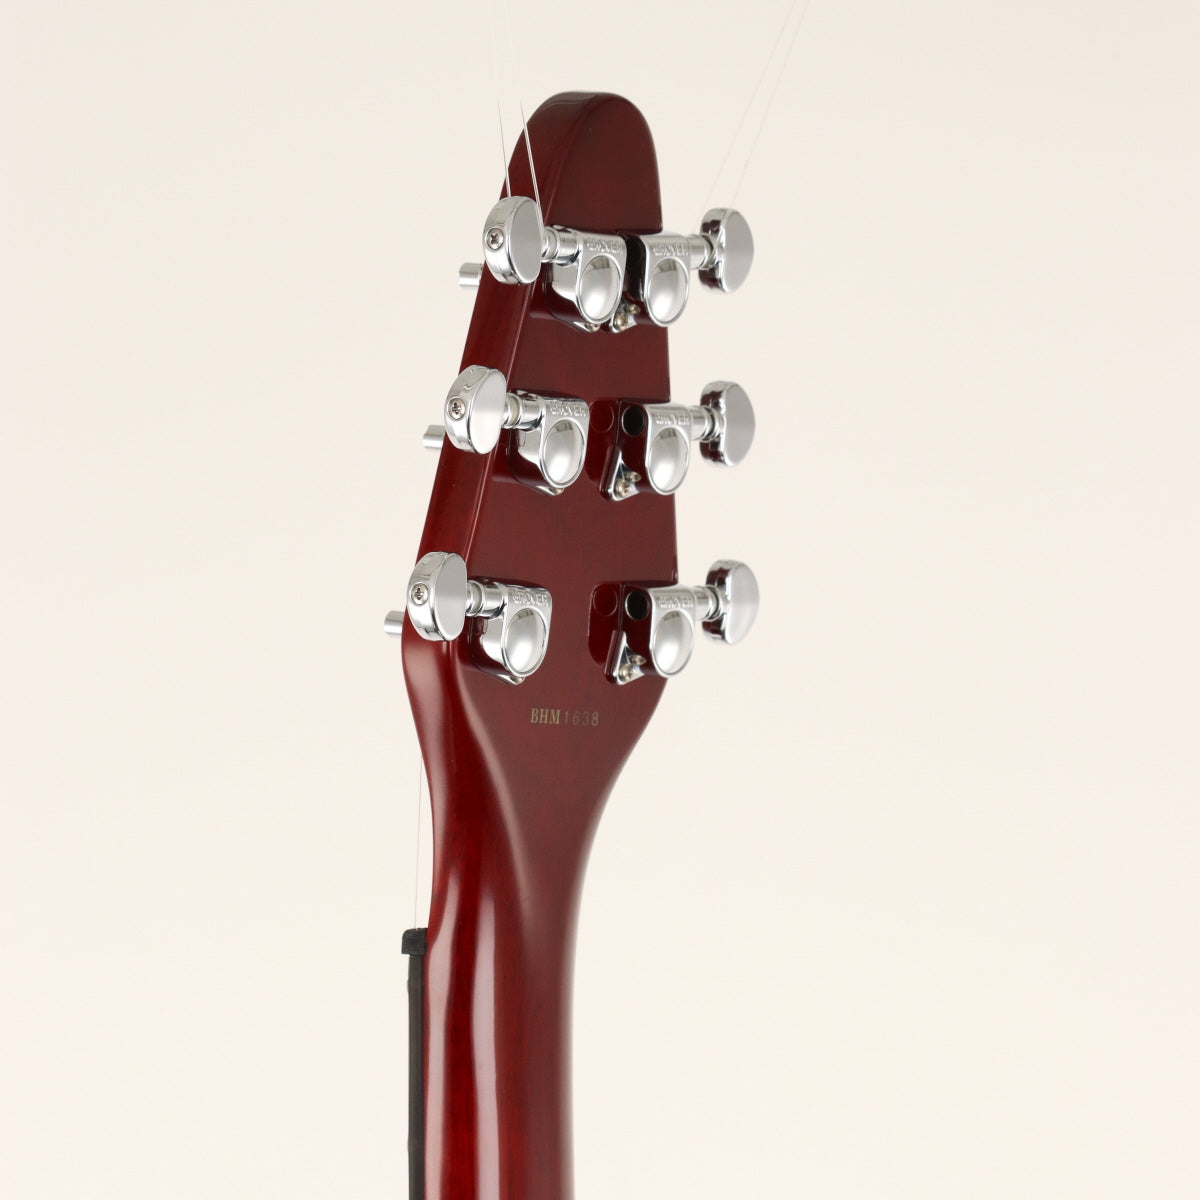 [SN BHM1638] USED Burns London / Brian May Special Red [11]